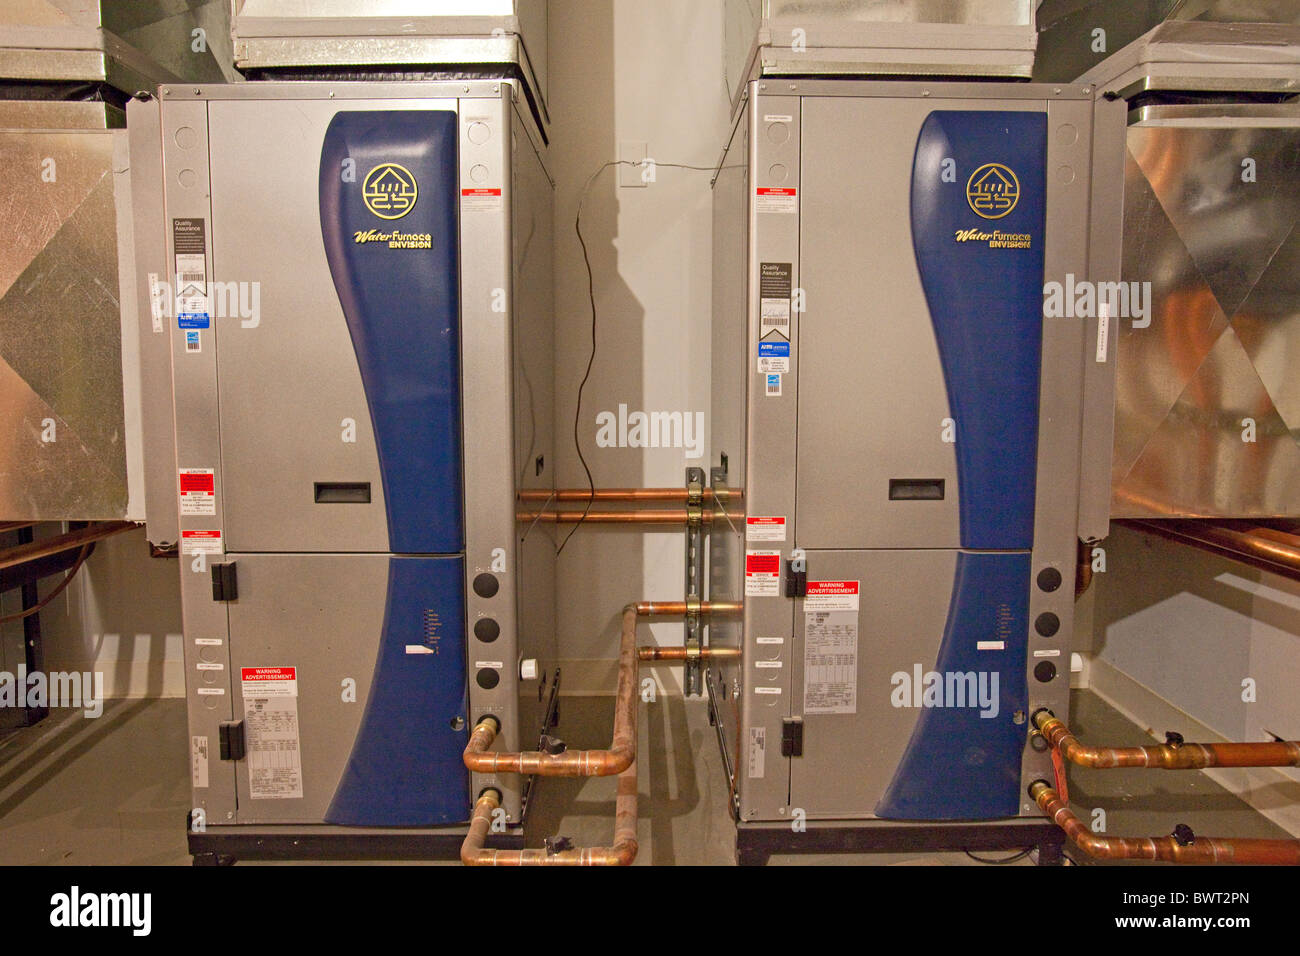 Heat Pump High Resolution Stock Photography and - Alamy